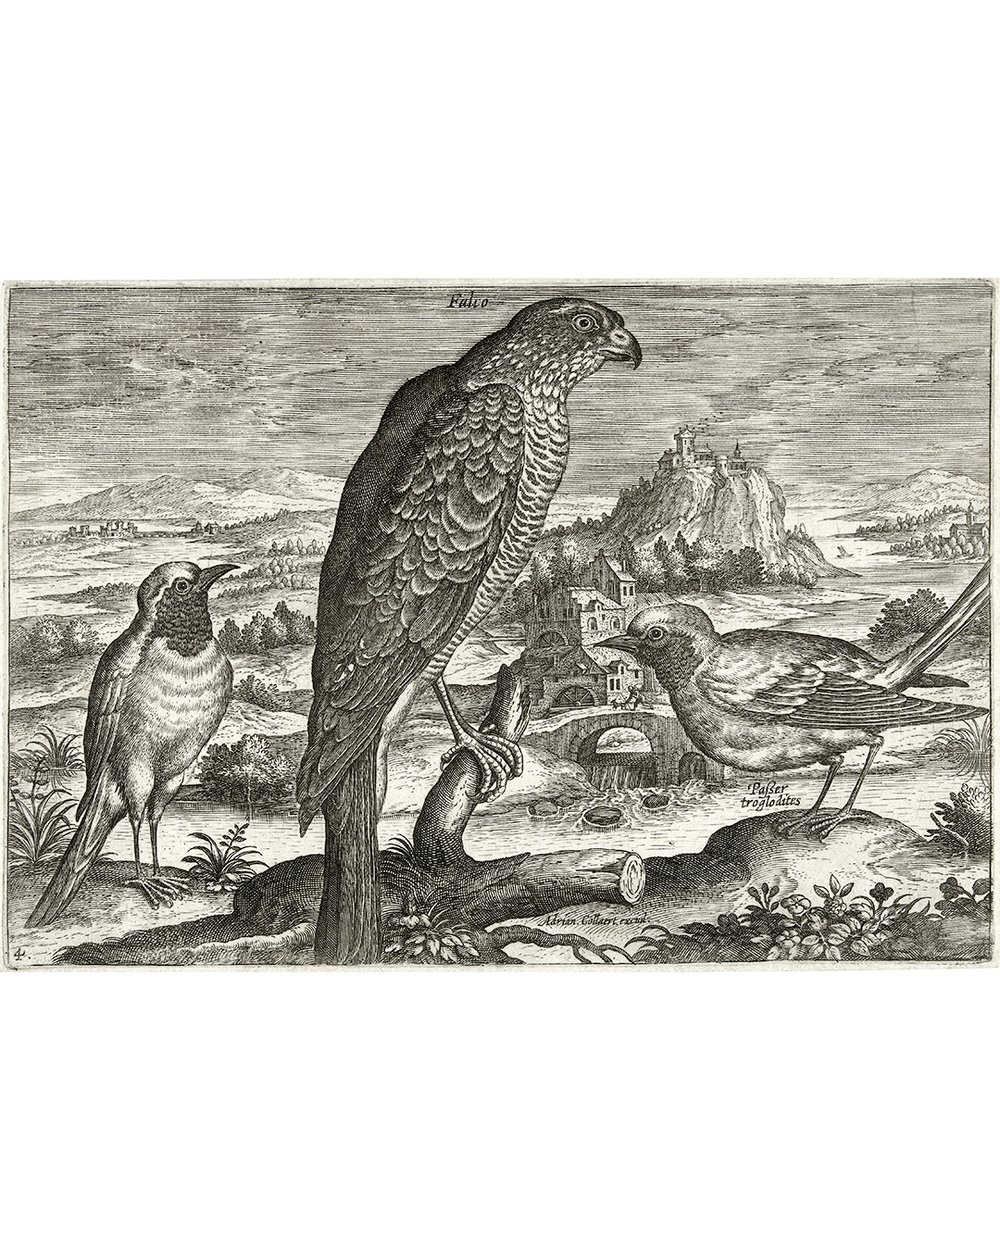 ''Some birds in a landscape'' (1598 - 1618)